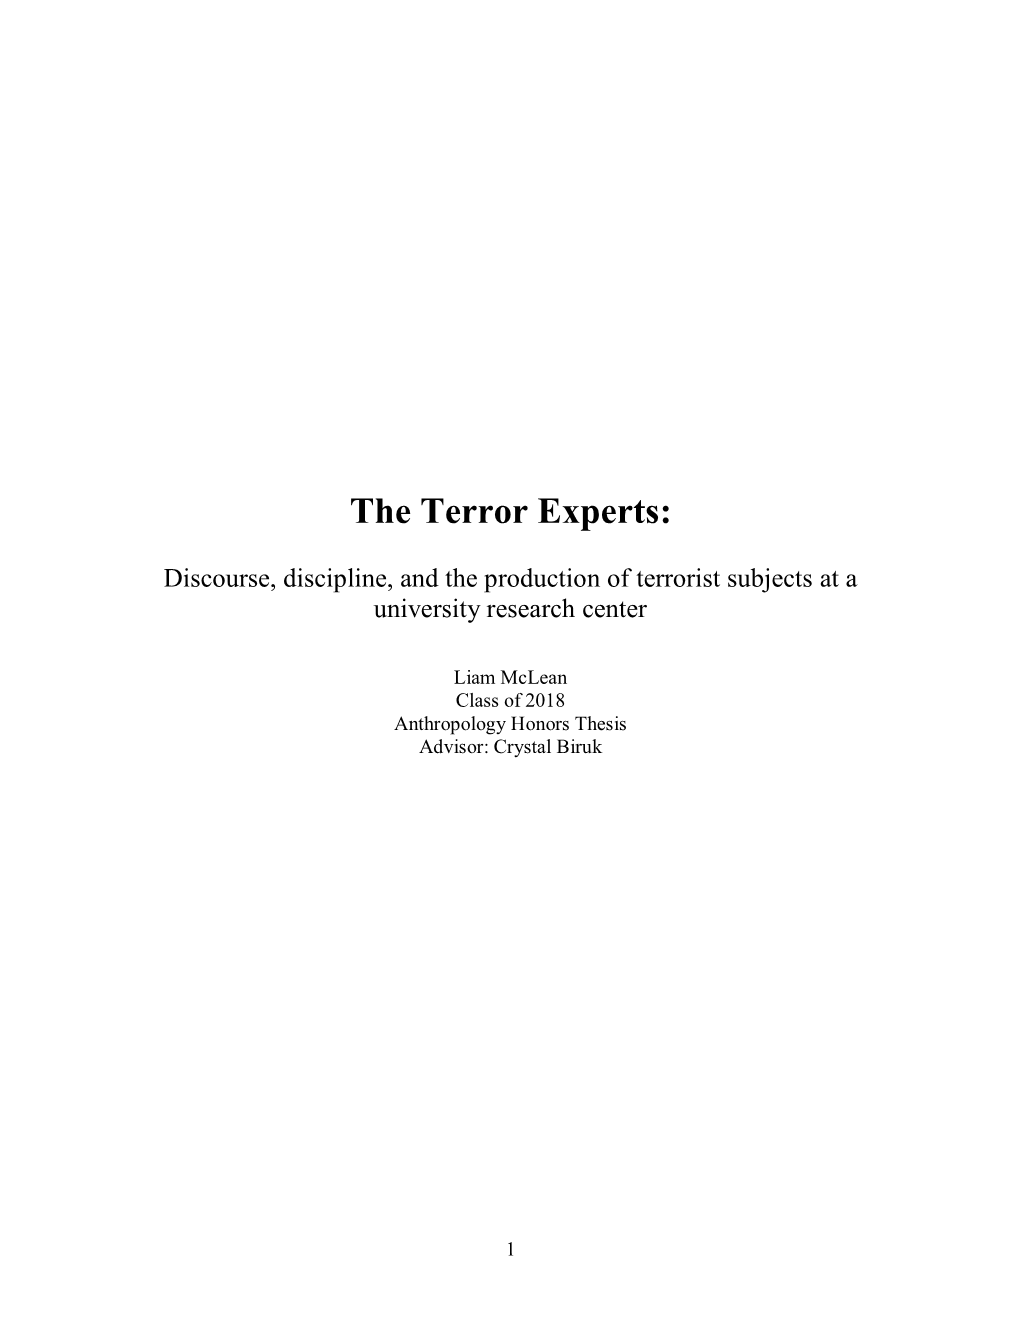 The Terror Experts